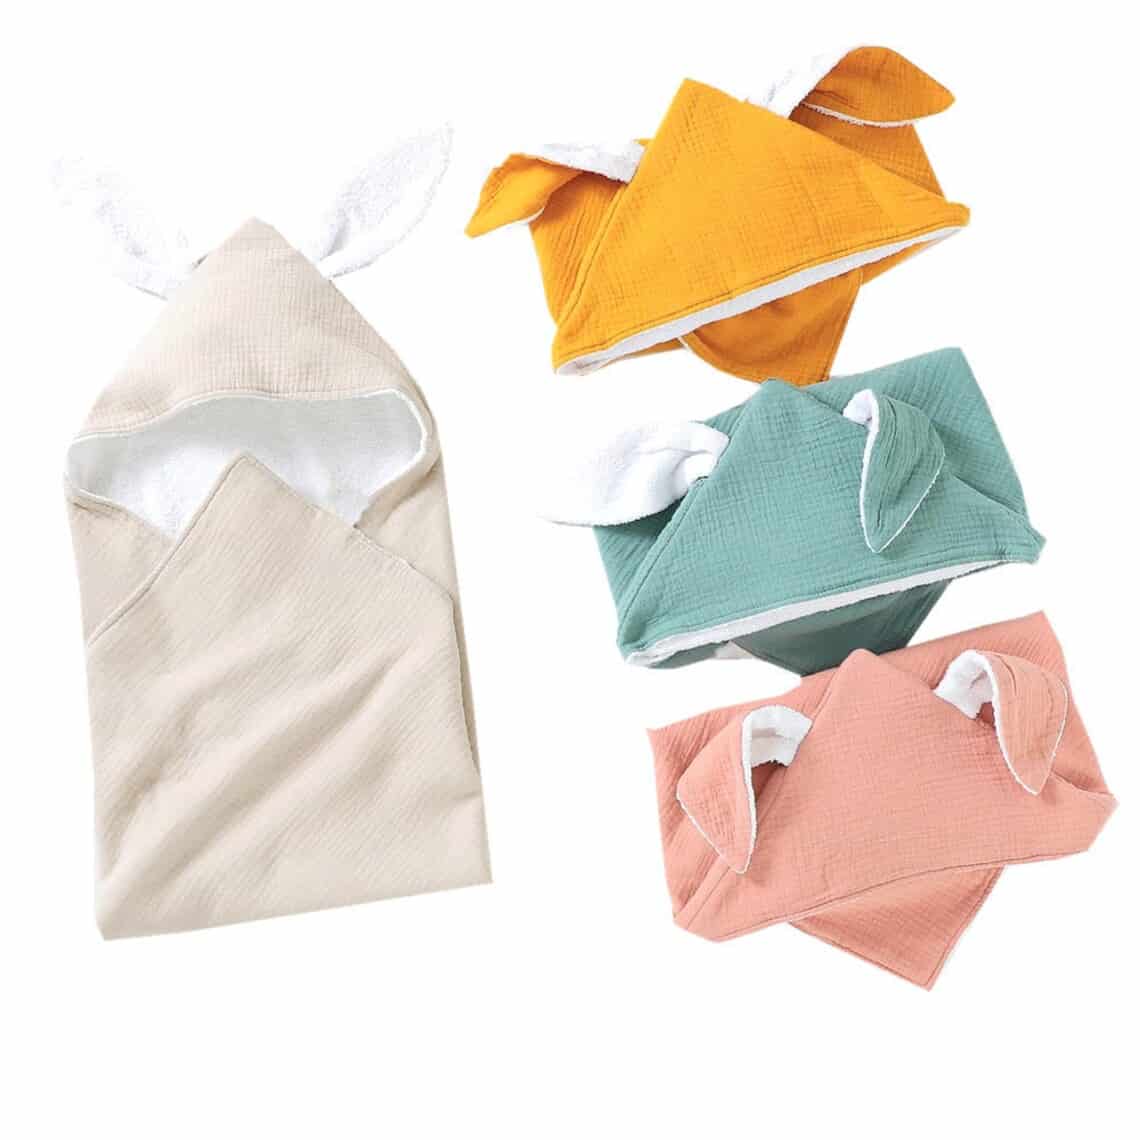 Four rabbit hooded towels shown, one light grey, orange, blue, and pink.